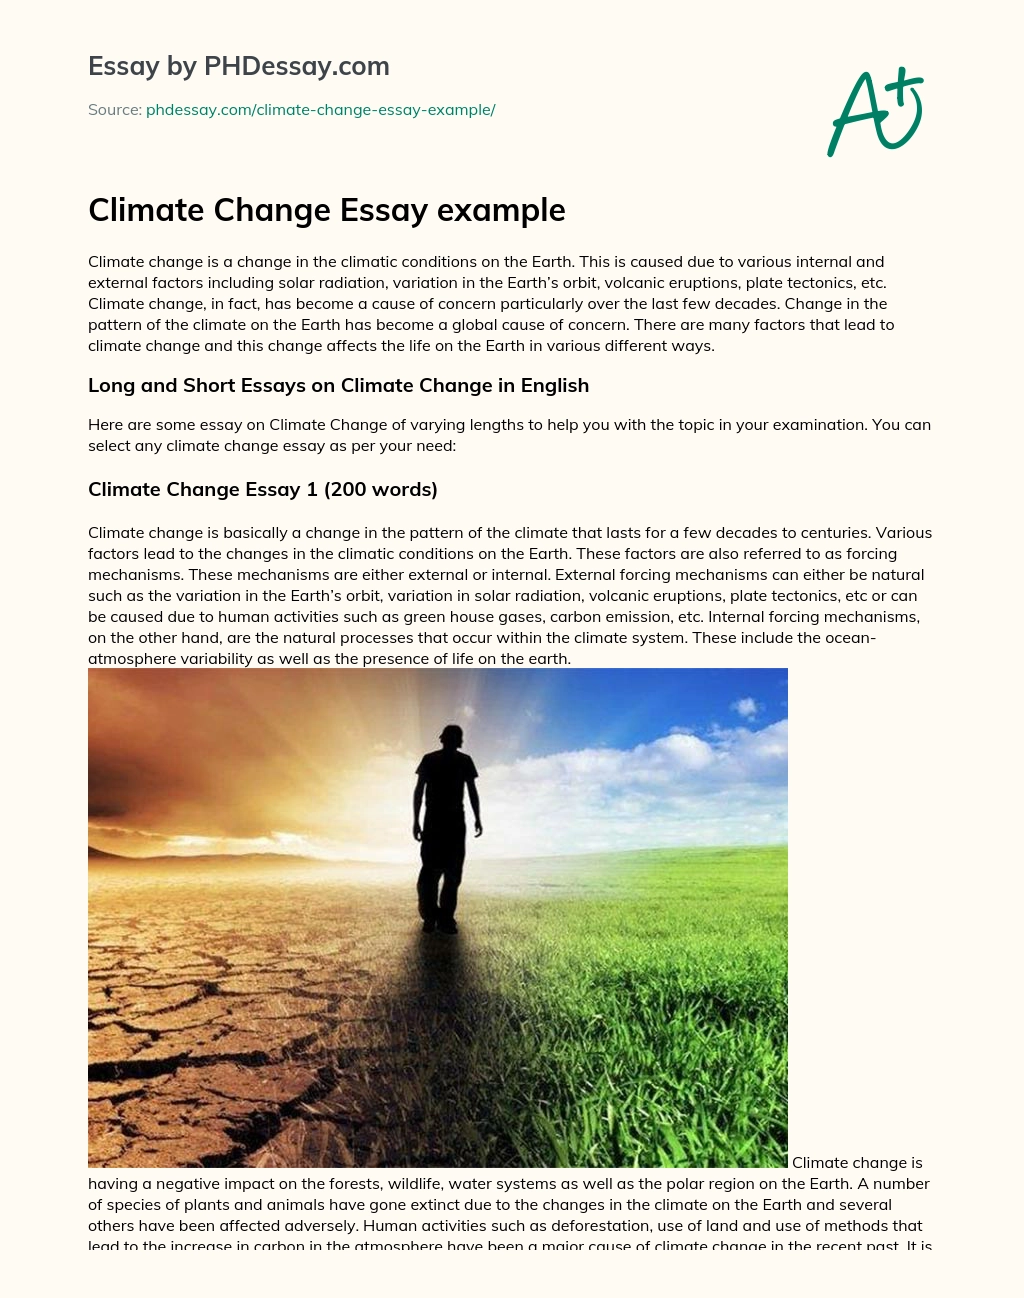 Climate Change Essay example essay